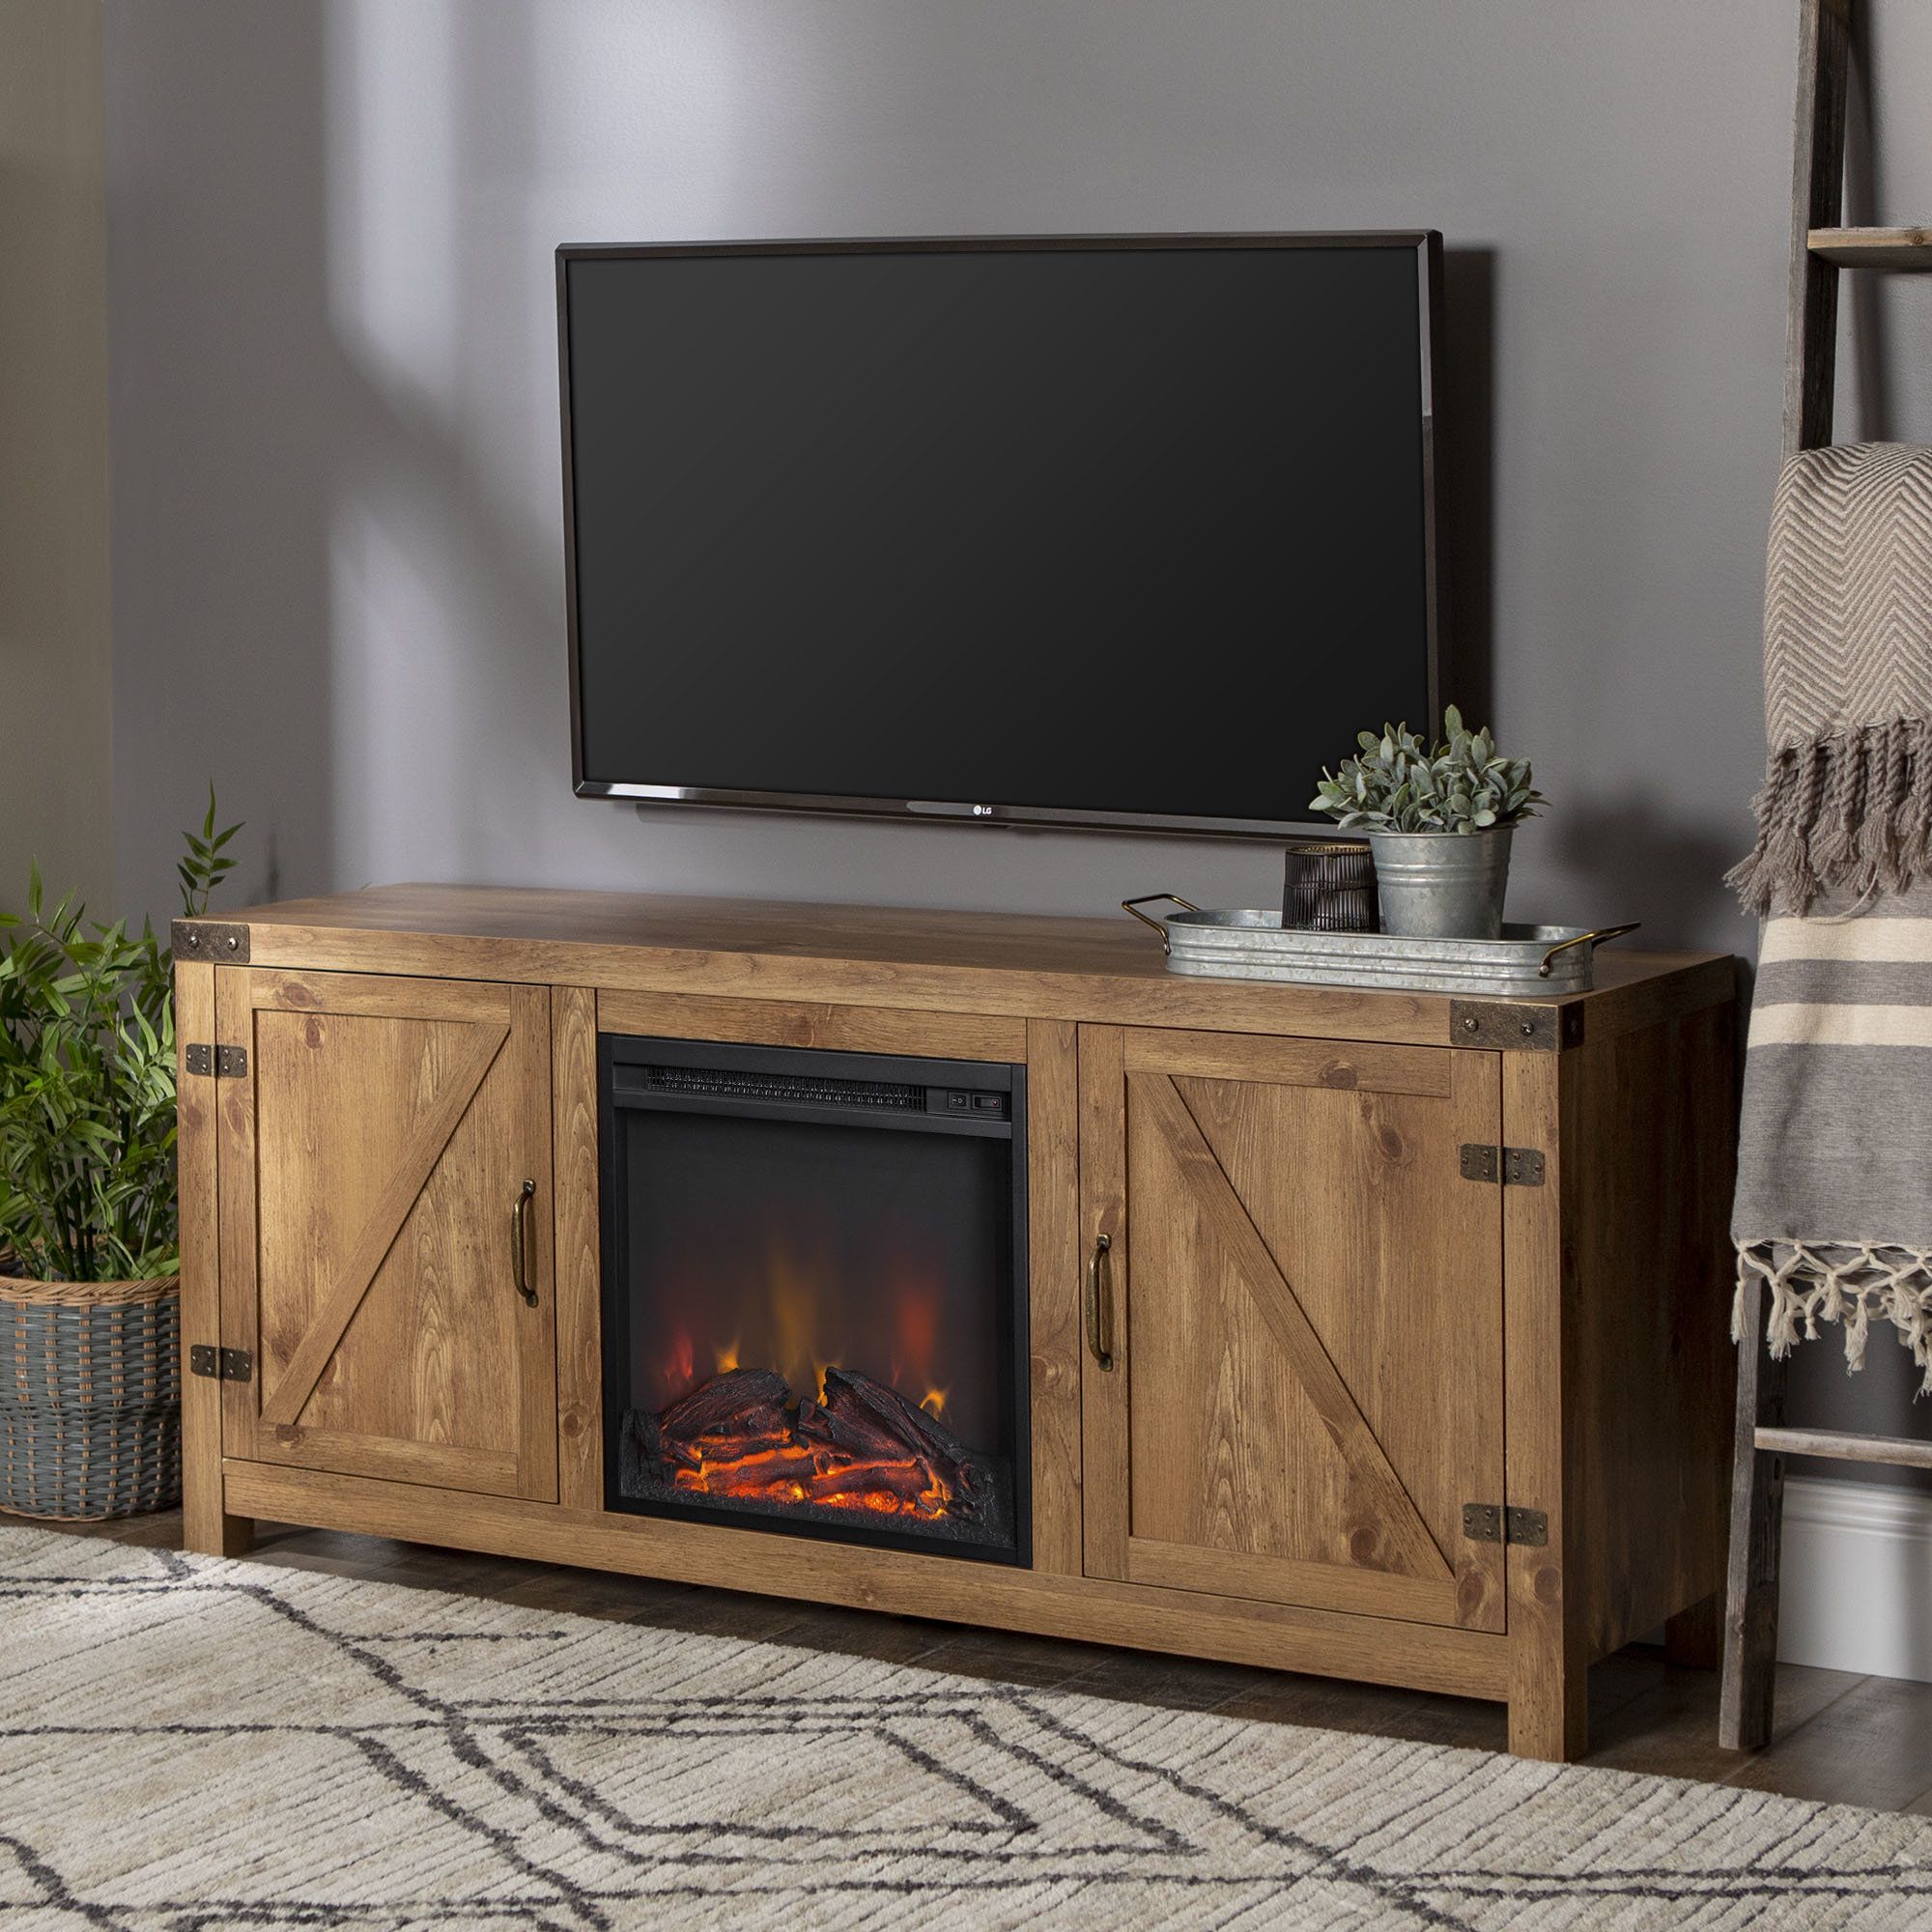 Fireplace Tv Stands & Entertainment Centers You'll Love | Wayfair (View 15 of 30)